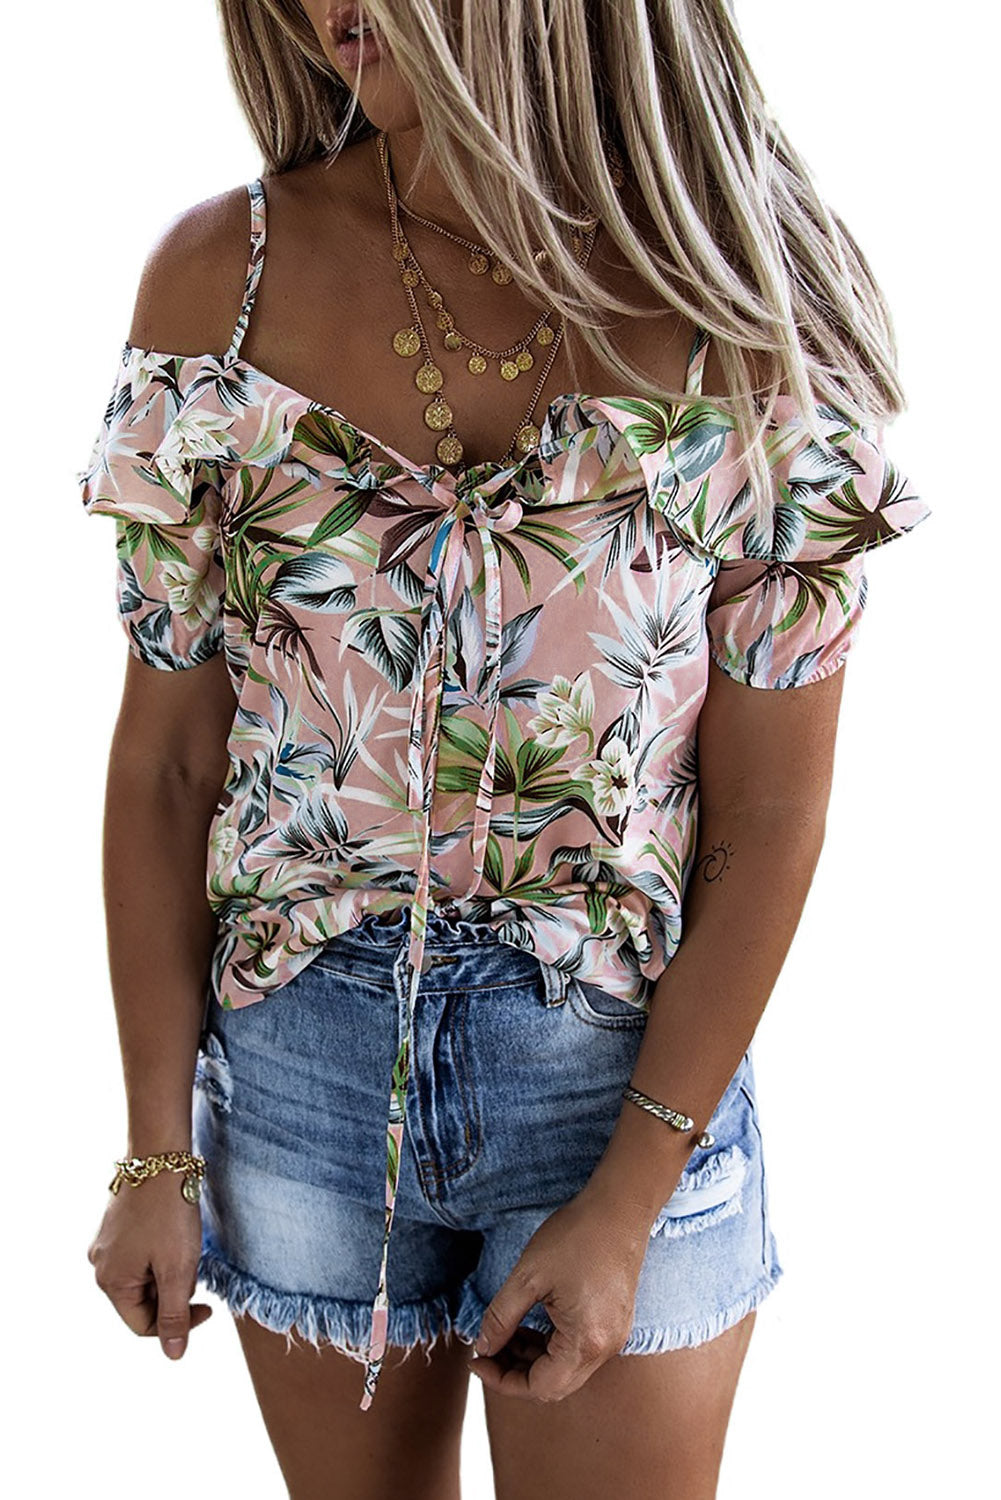 Floral Print Spaghetti Strap Ruffled Lace-up Short Sleeve Top